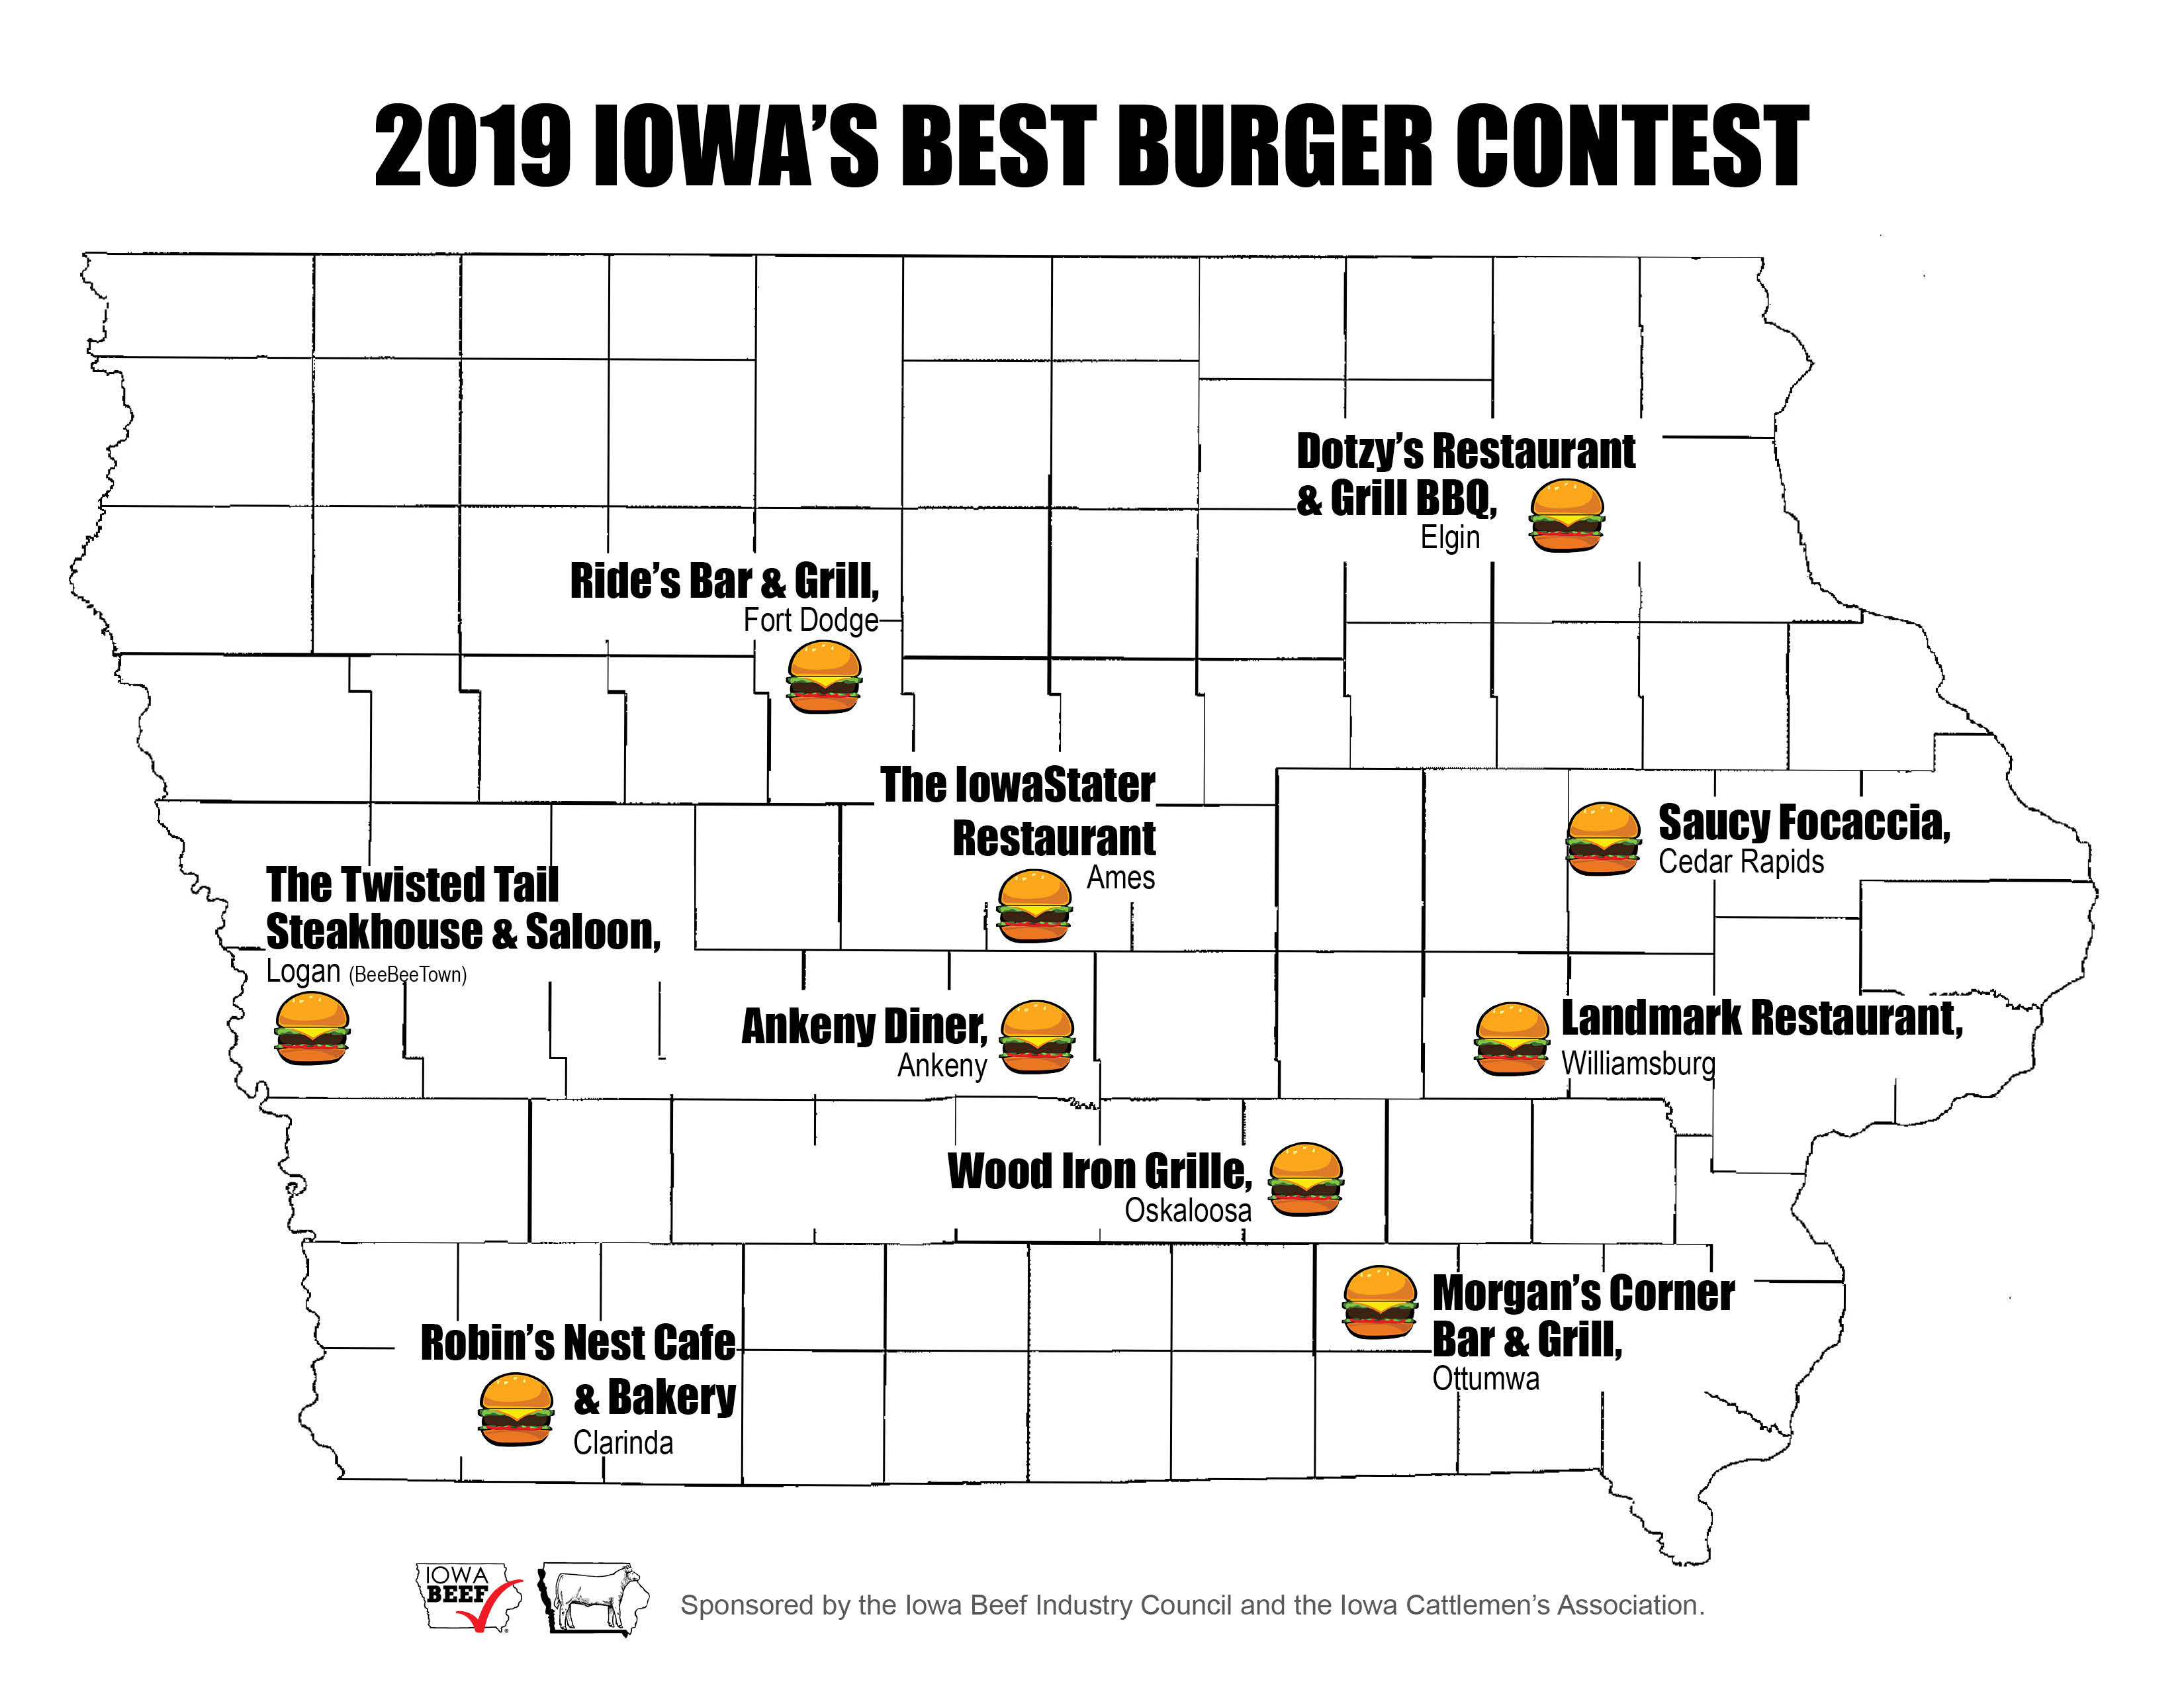 Top 10 Announced for Iowa’s Best Burger Contest